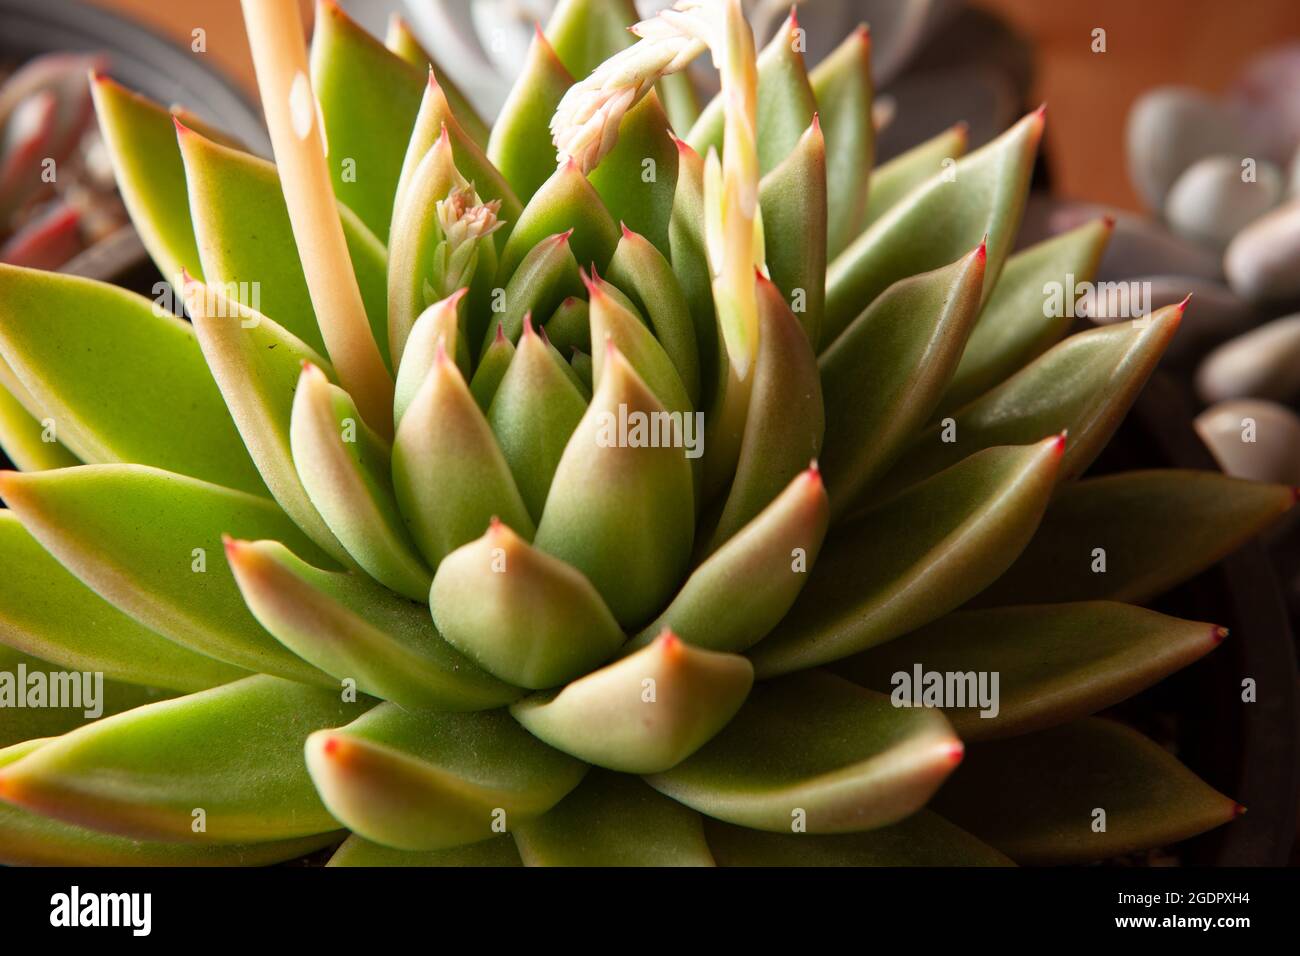 Green succulent plant with thick funny leaves, close-up. Top view of echeveria with red tips. High-quality photo Stock Photo